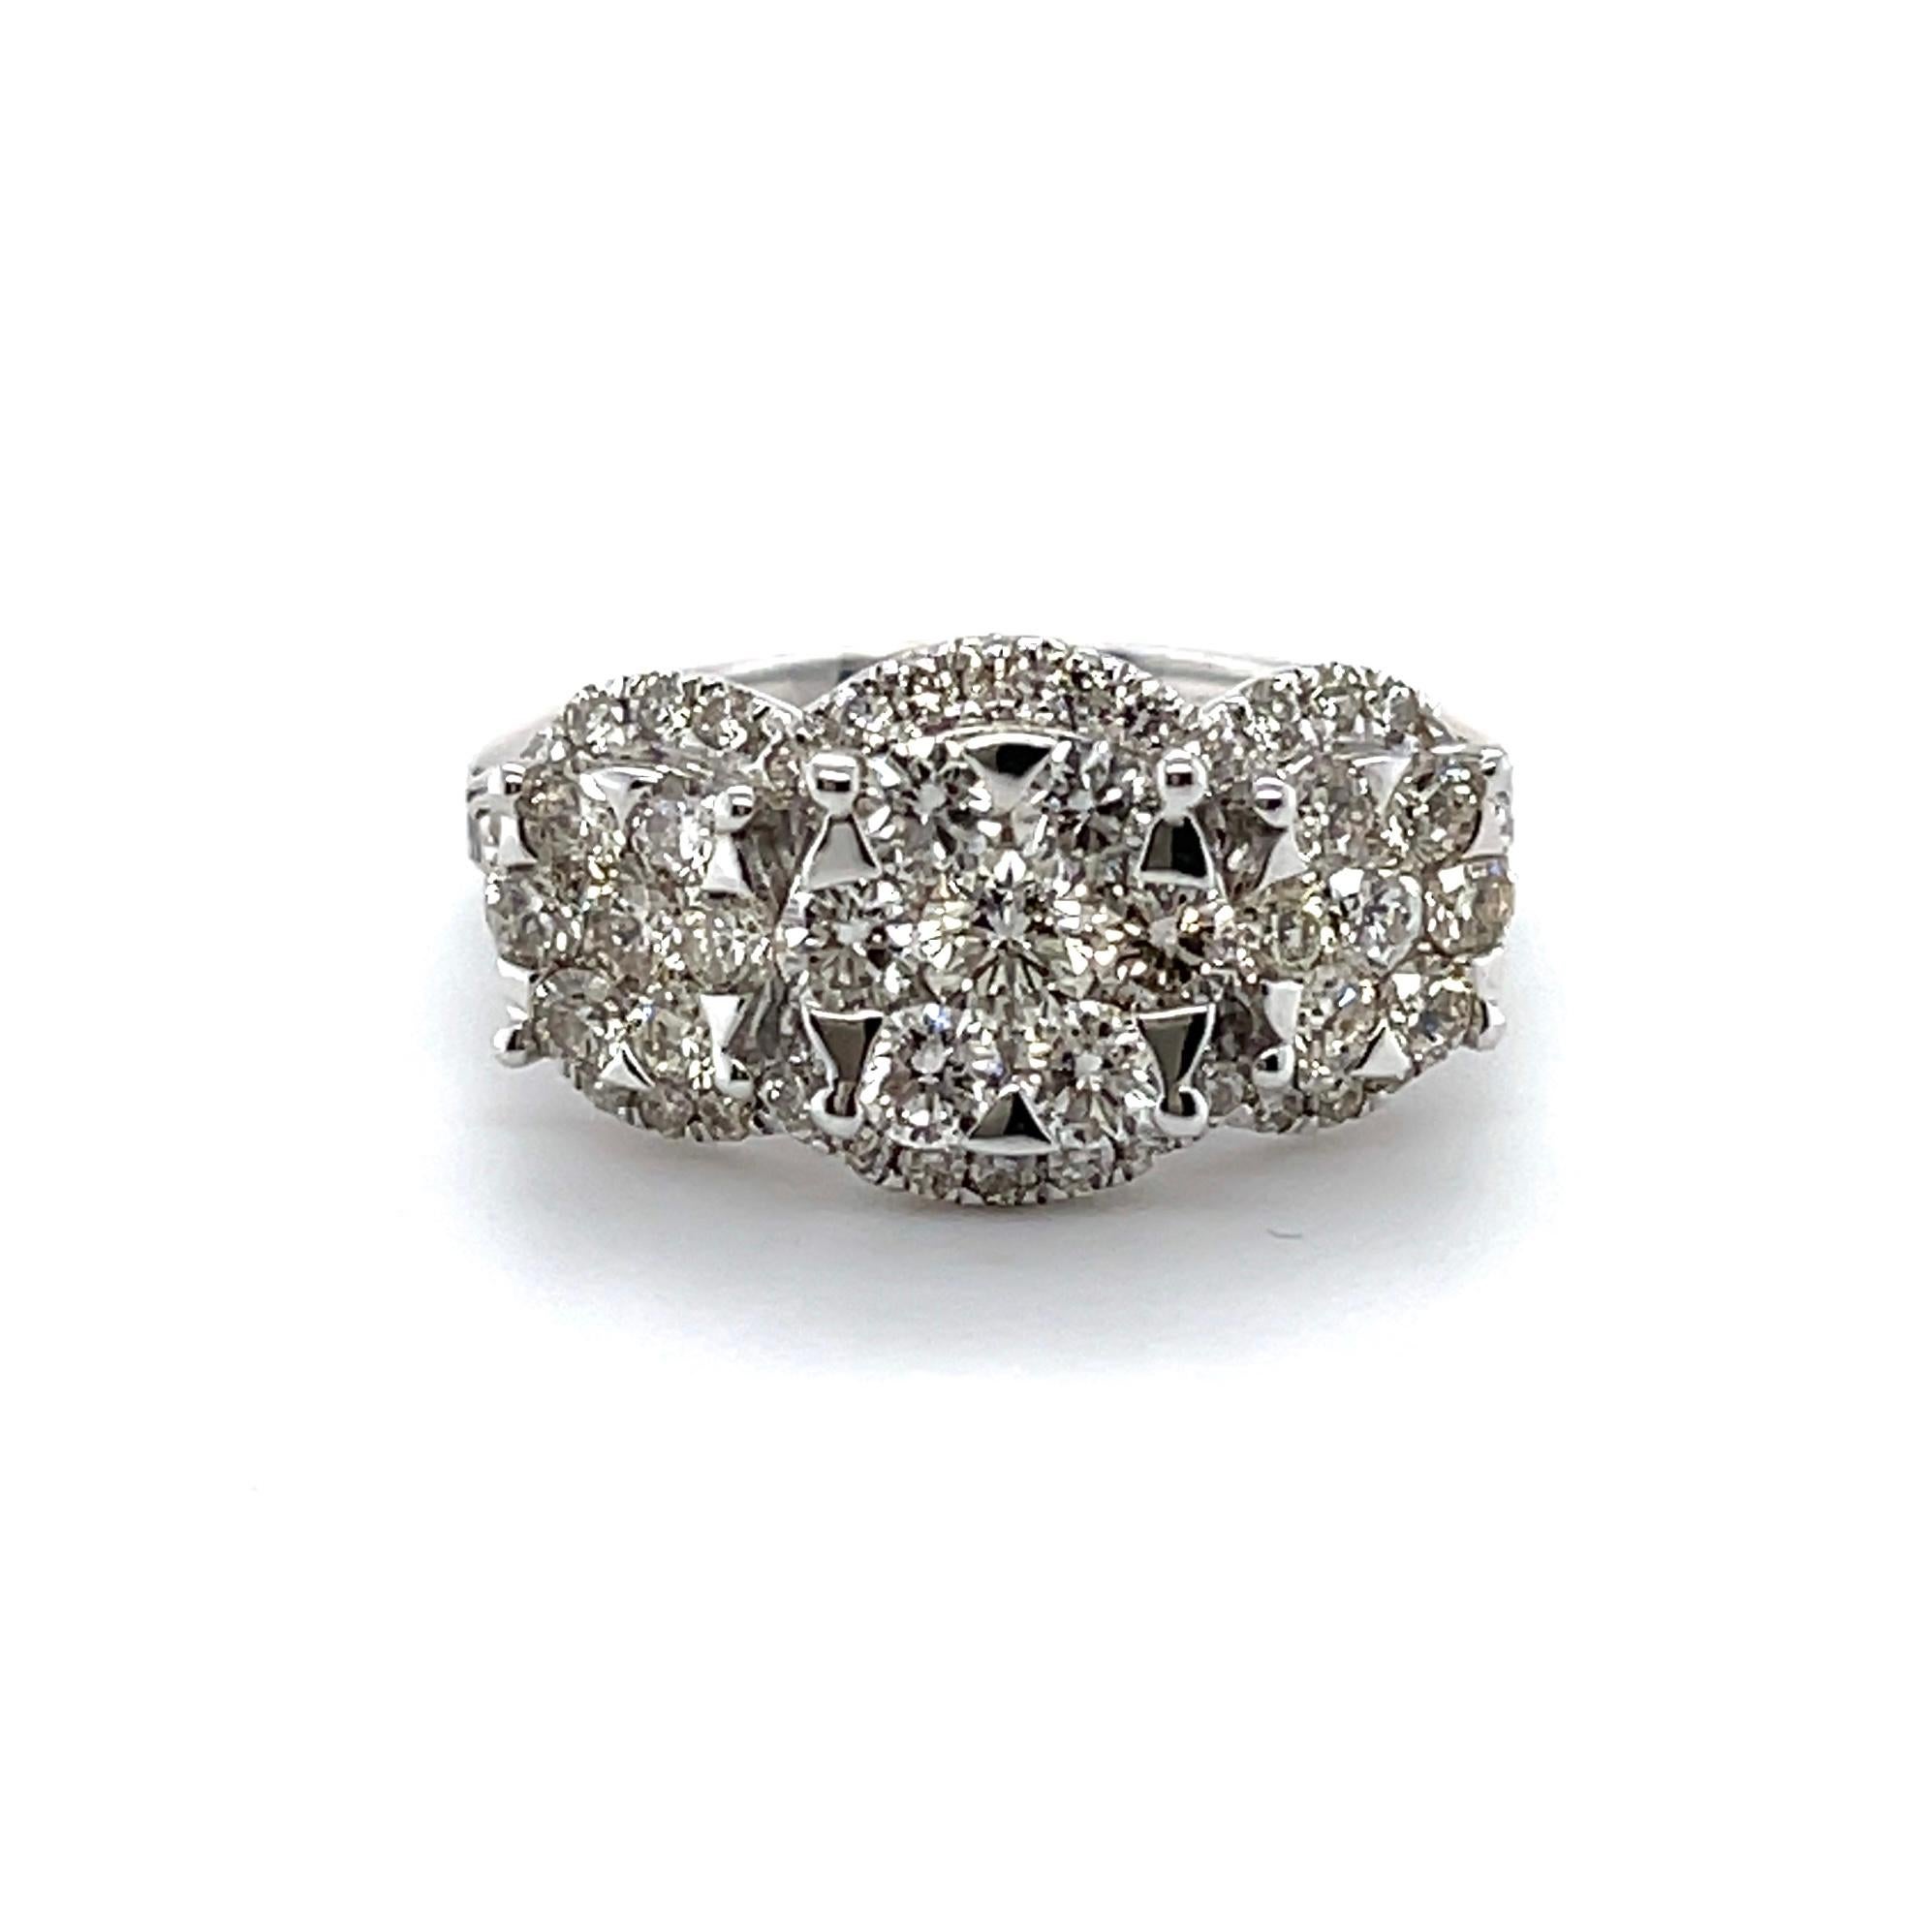 For Sale:  18ct White Gold Trilogy Diamond Ring